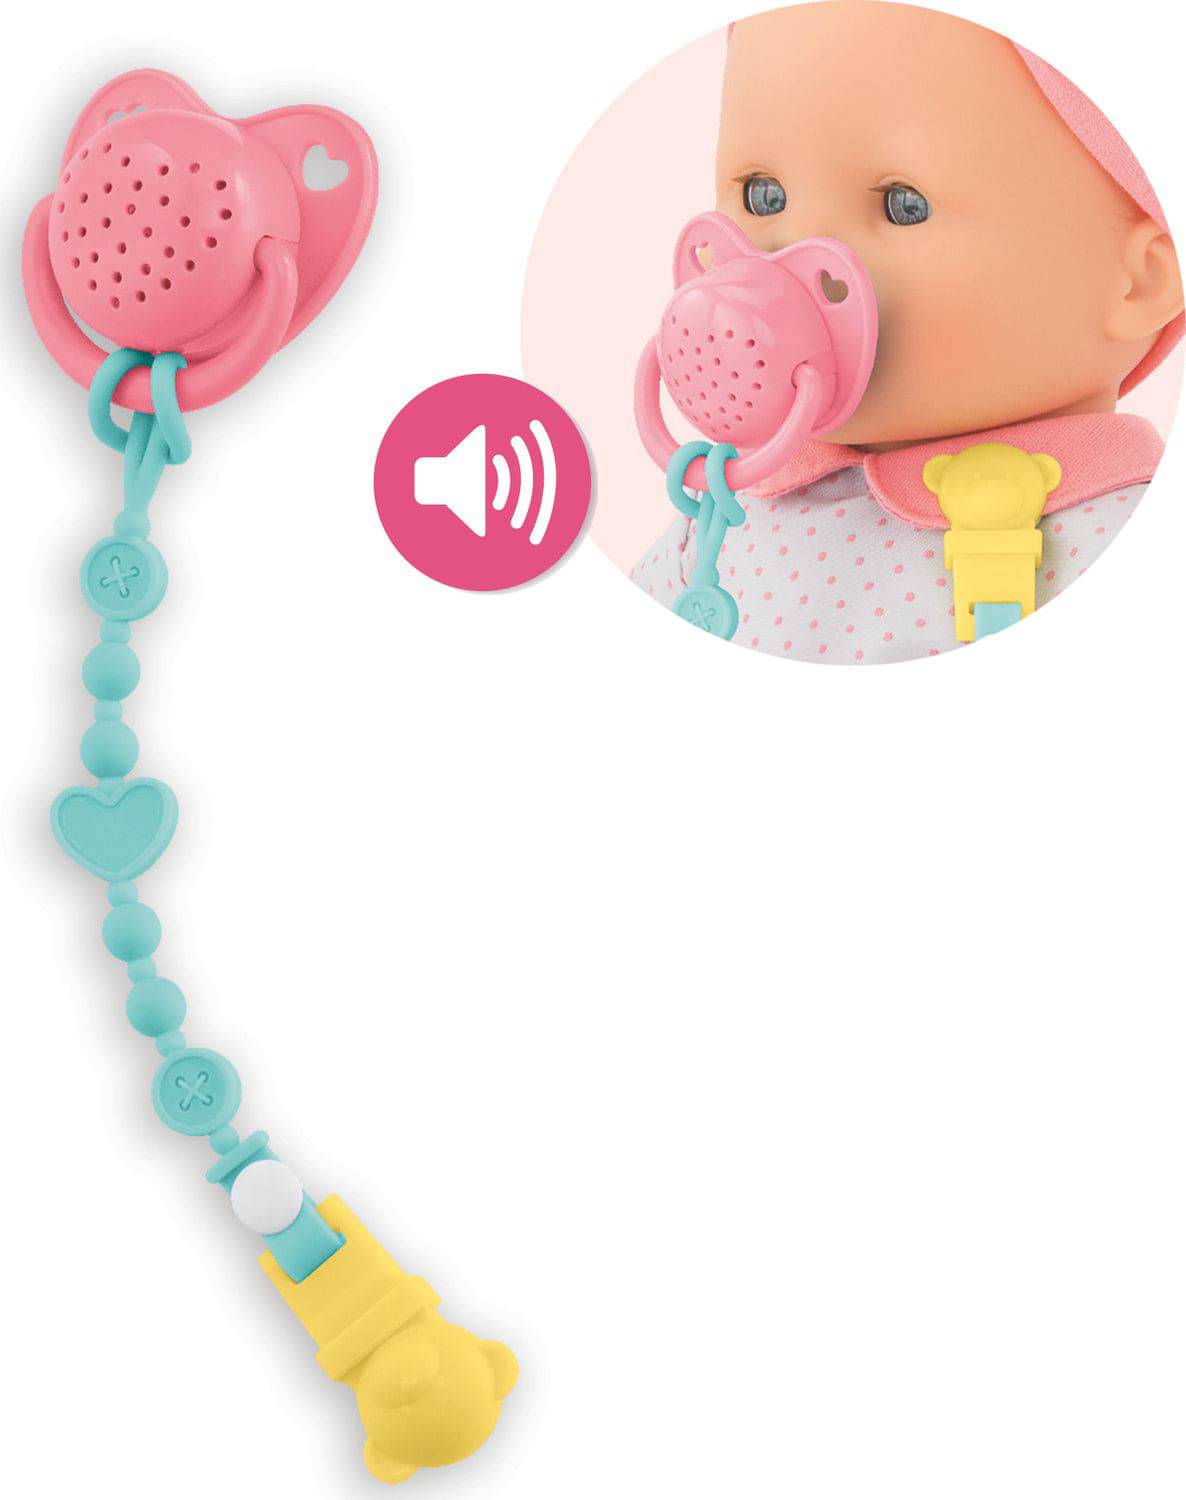 Corolle 14"/17" Pacifier with Sounds - A Child's Delight